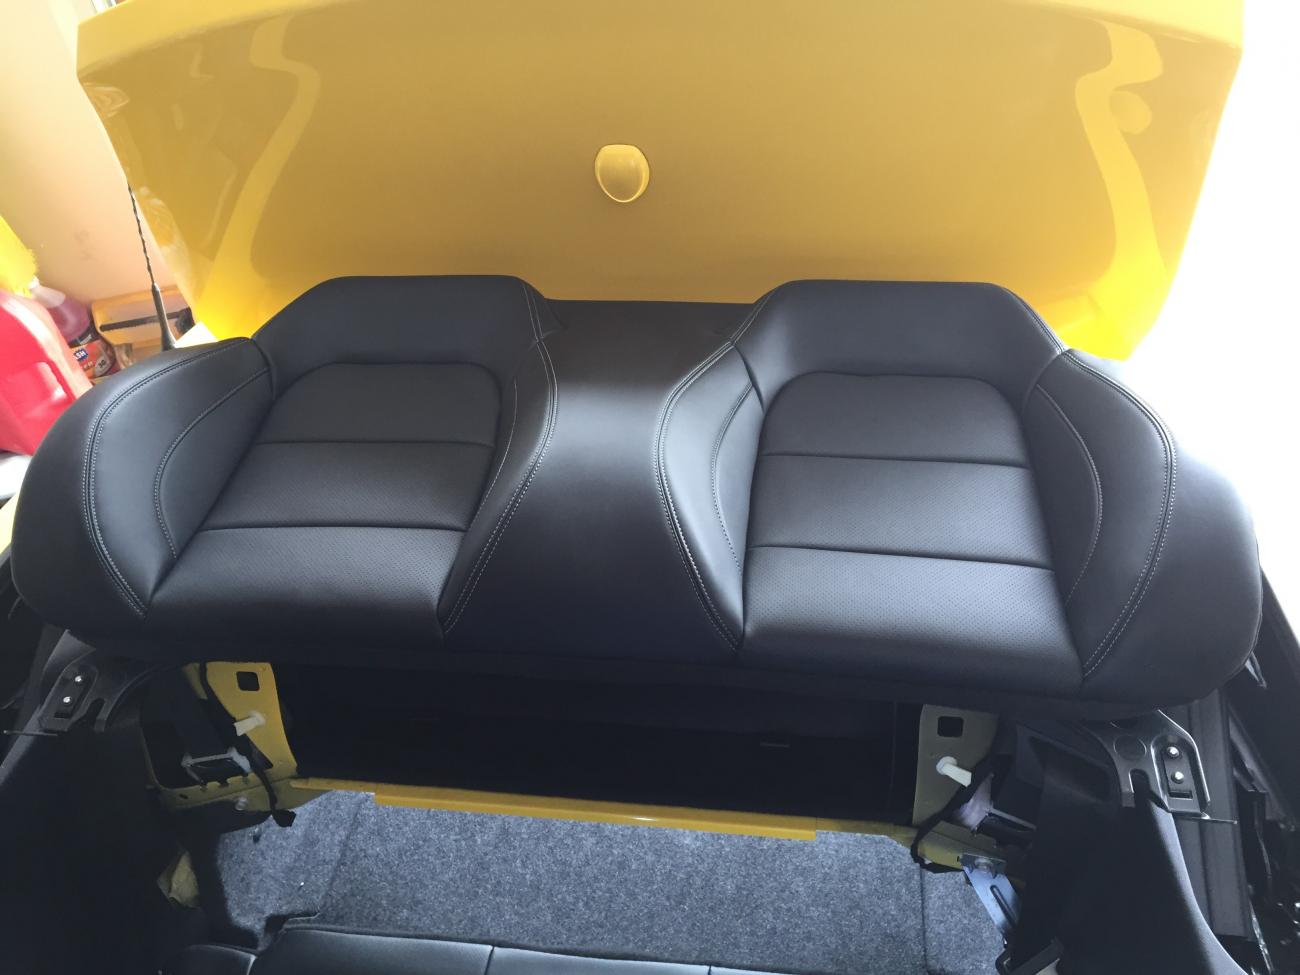 seat back laid out